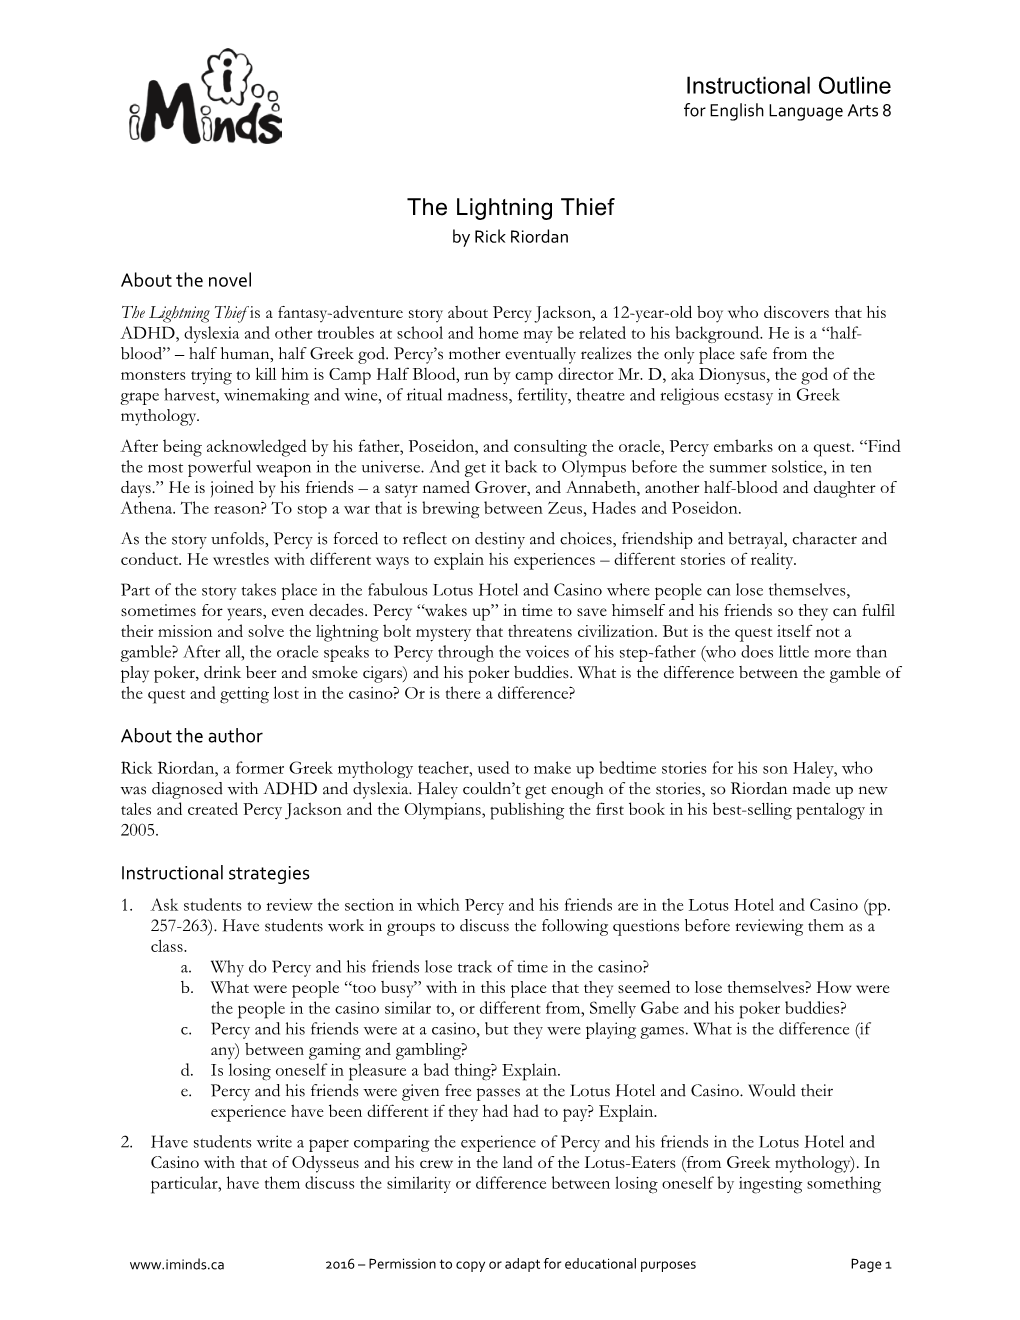 Instructional Outline the Lightning Thief